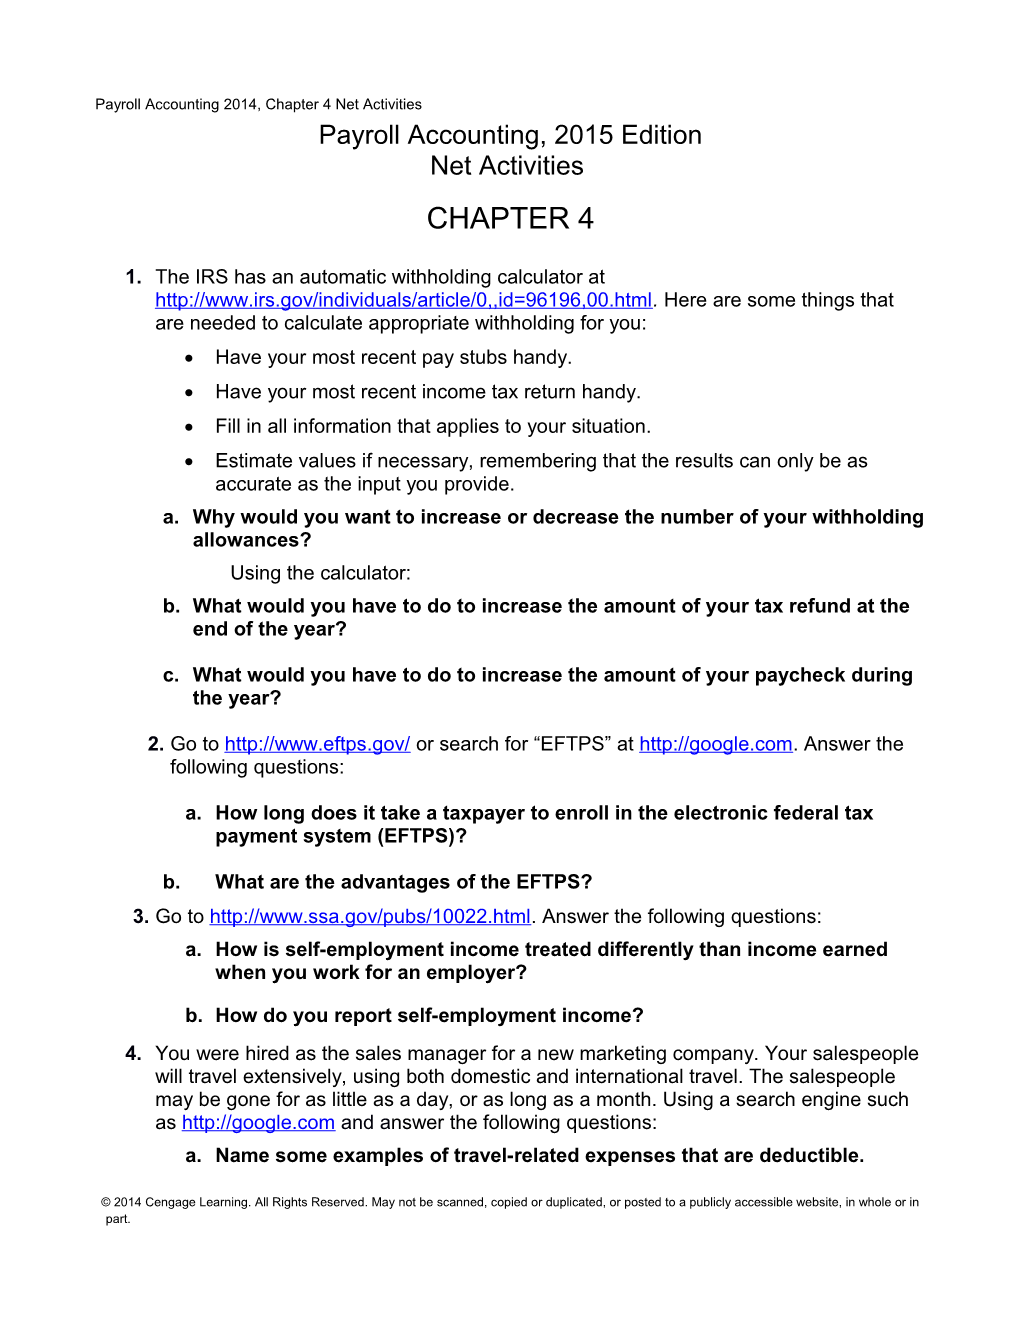 Payroll Accounting 2014, Chapter 4 Net Activities